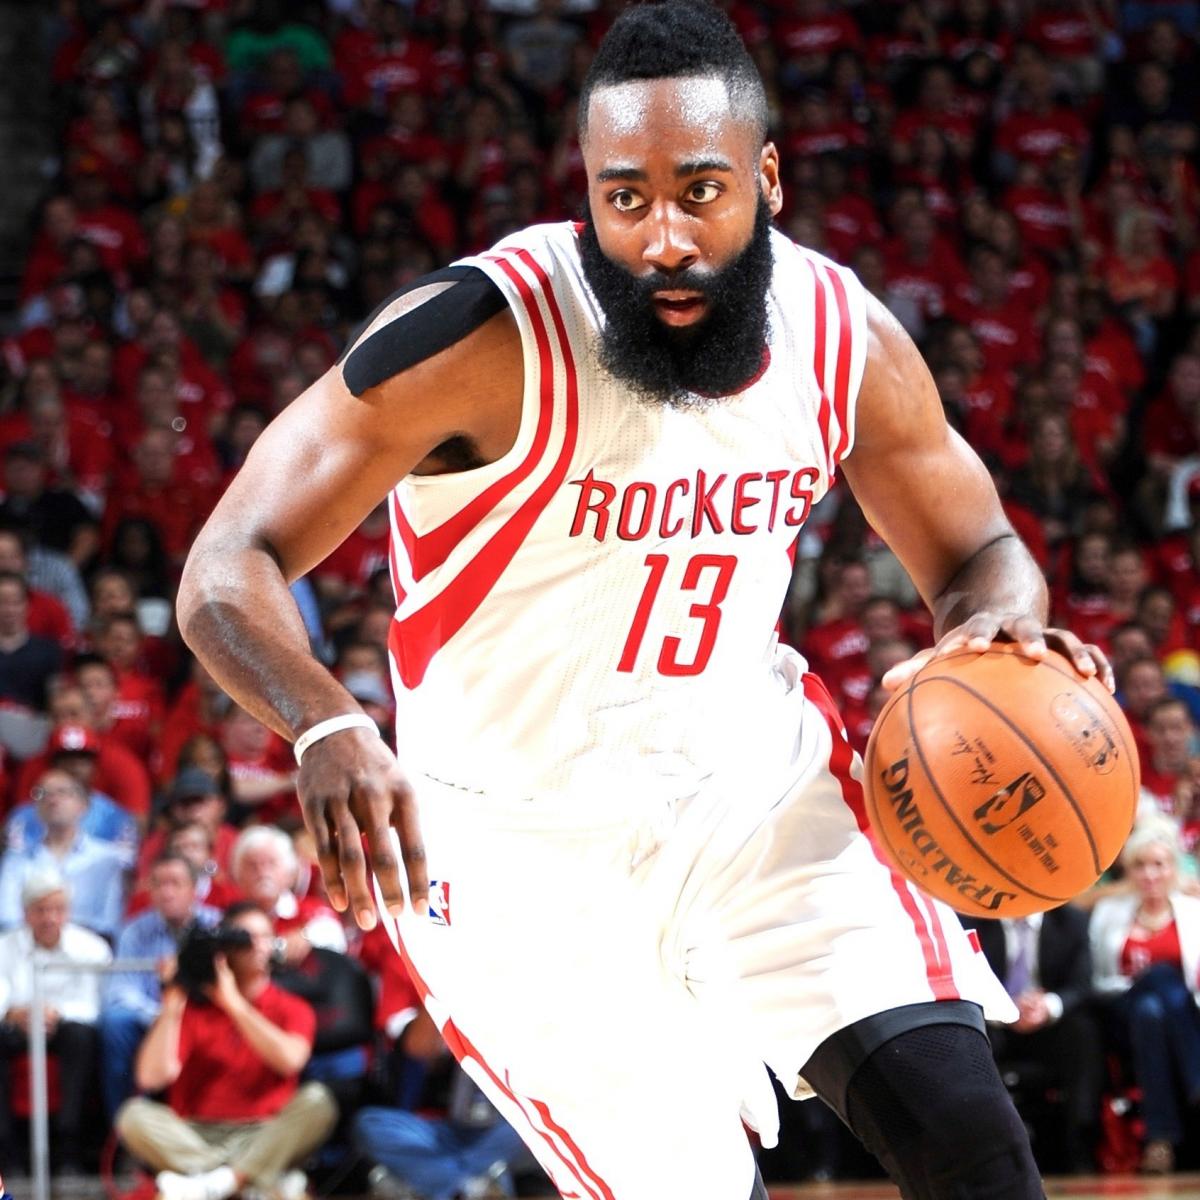 Los Angeles Clippers vs. Houston Rockets: Live Score, Analysis for Game 2 | Bleacher ...